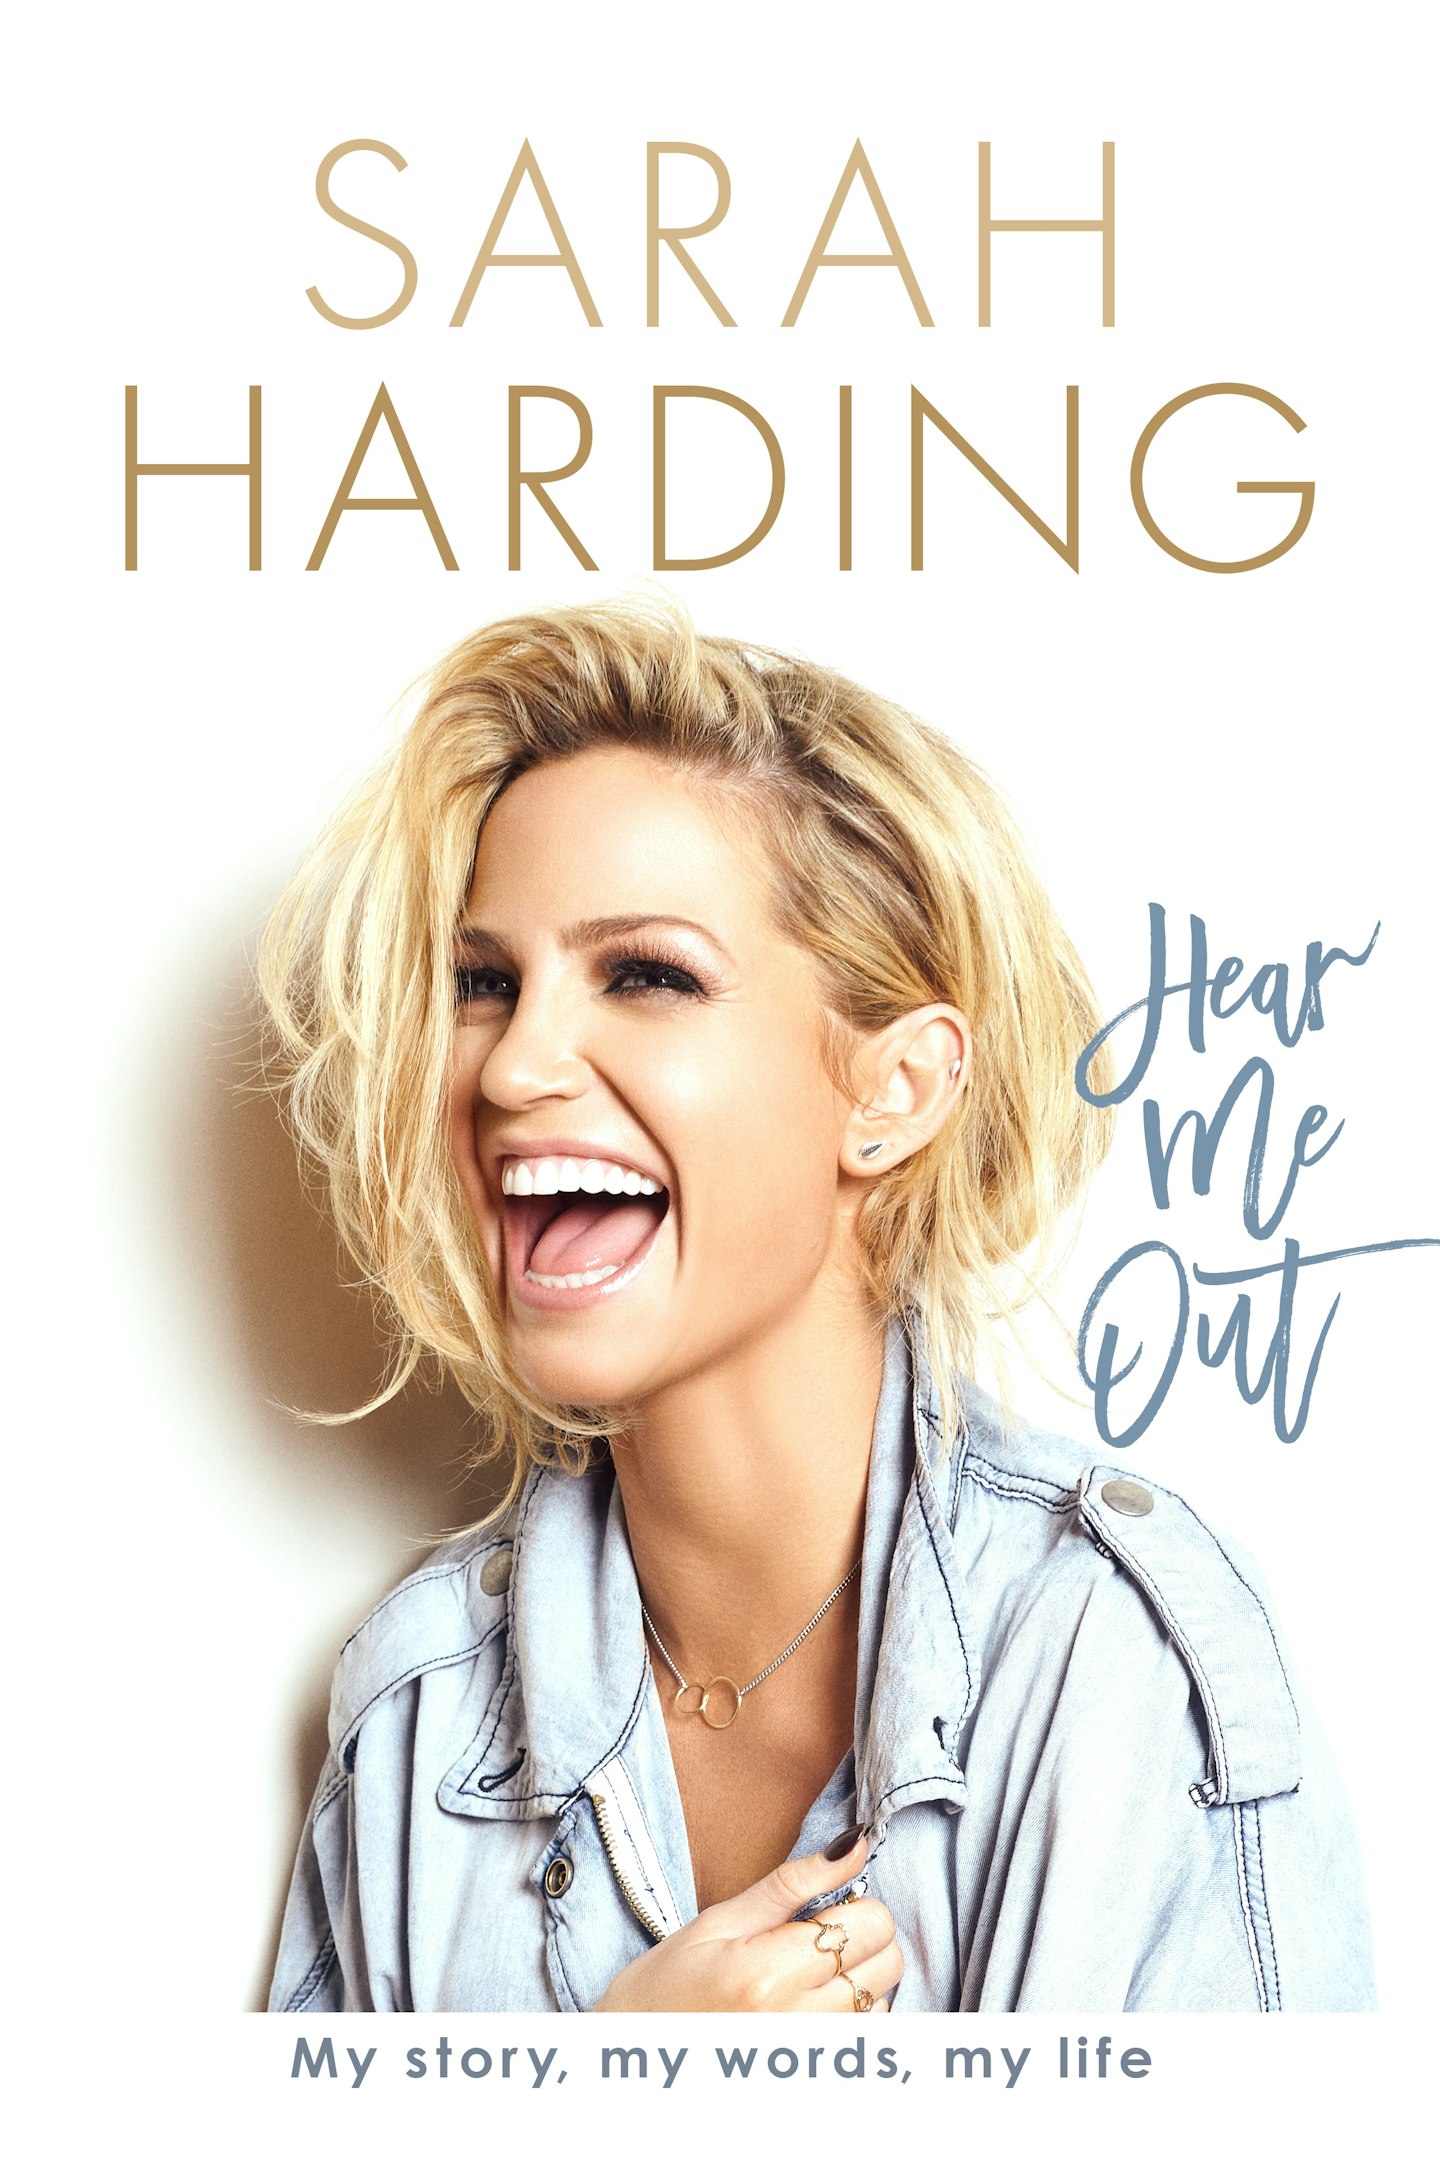 Sarah Harding Hear Me Out autobiography book amid advanced breast cancer battle